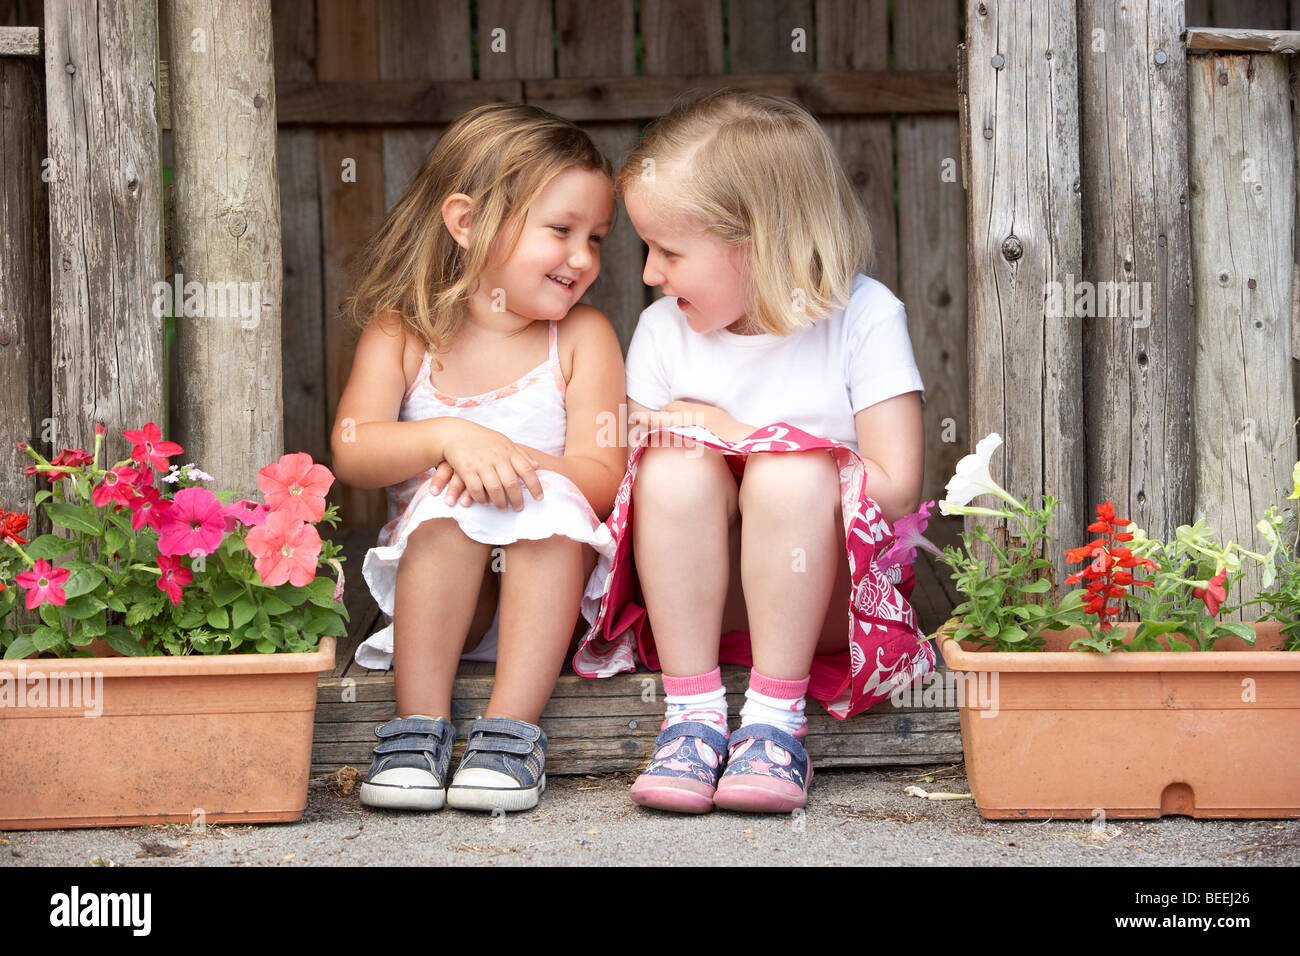 Two Young Girls Playing in Wooden House Stock Photo